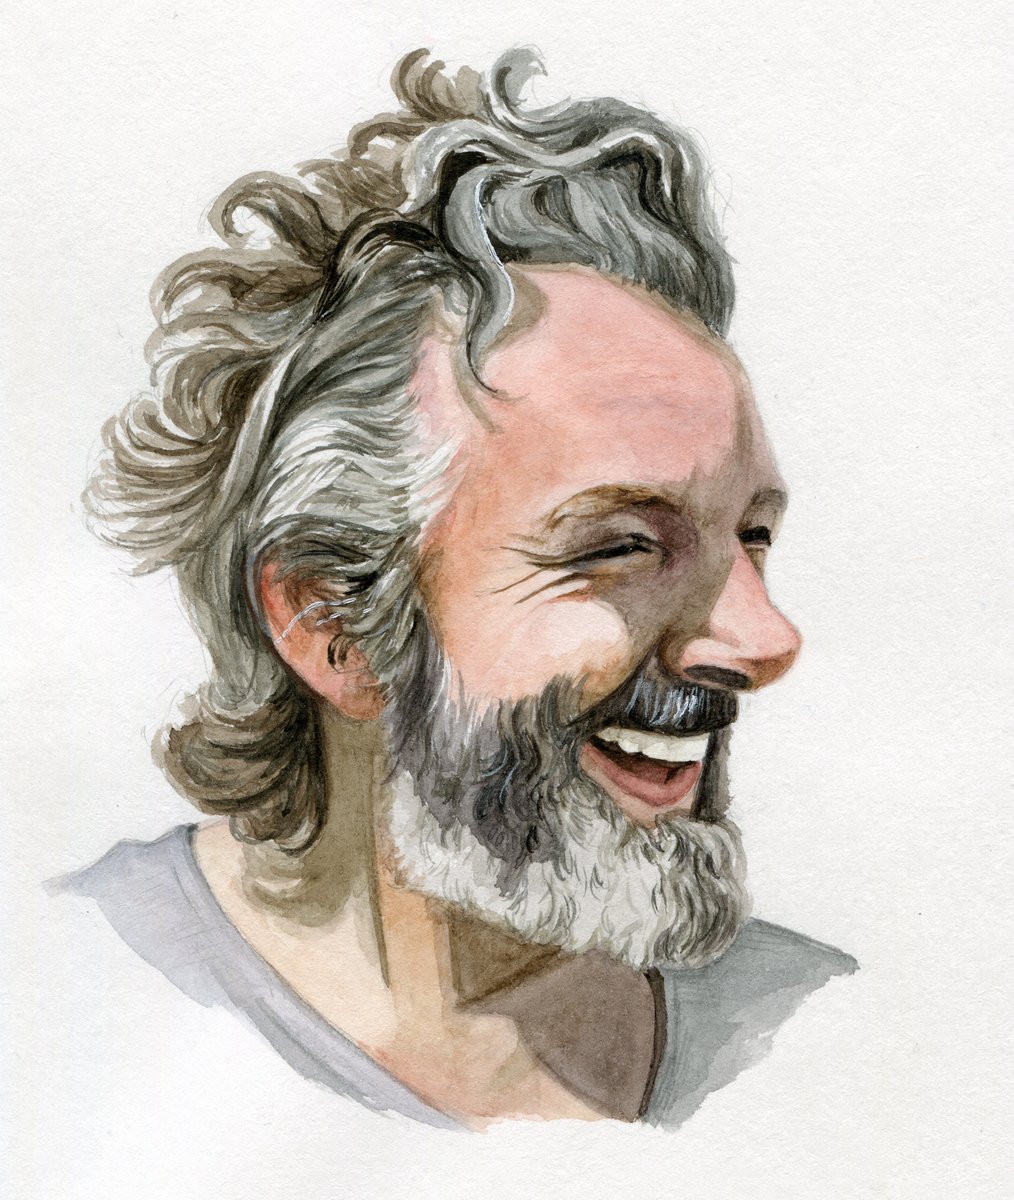 The end result
#MichaelSheen